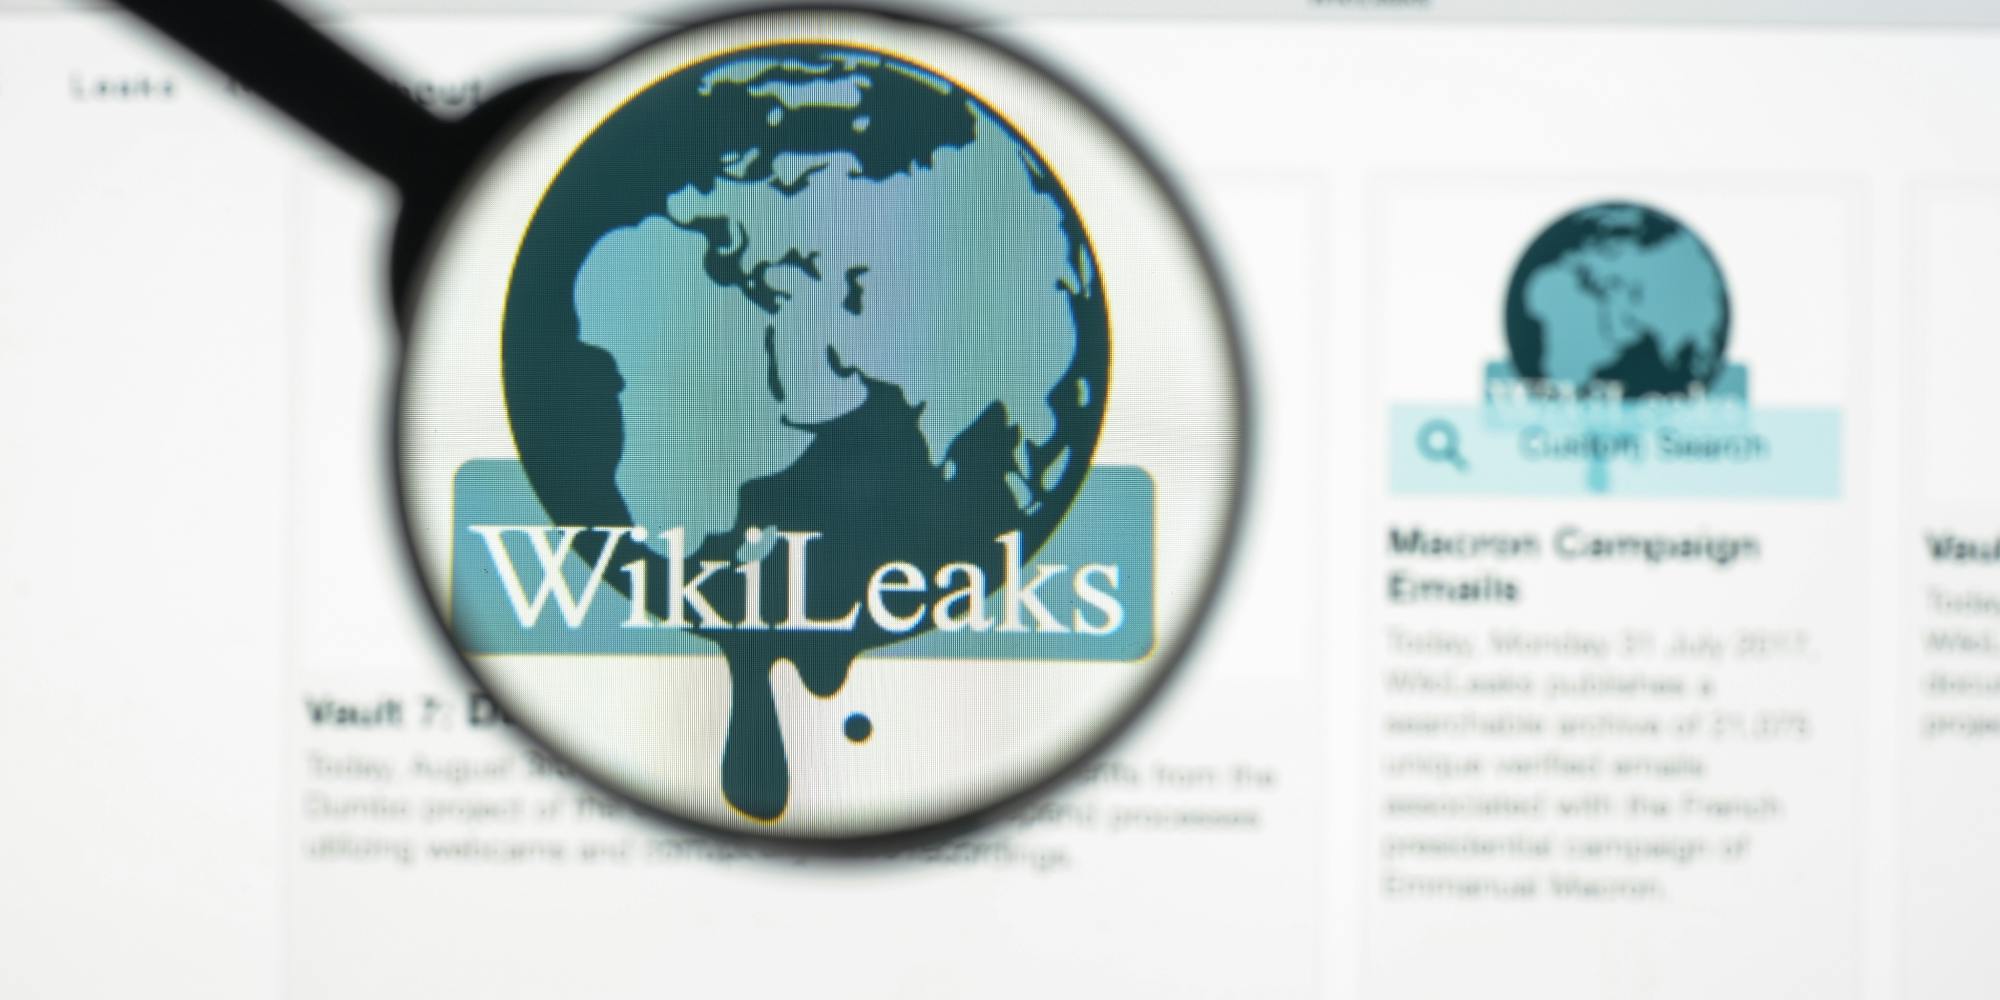 WikiLeaks is struggling to stay online as millions of documents disappear